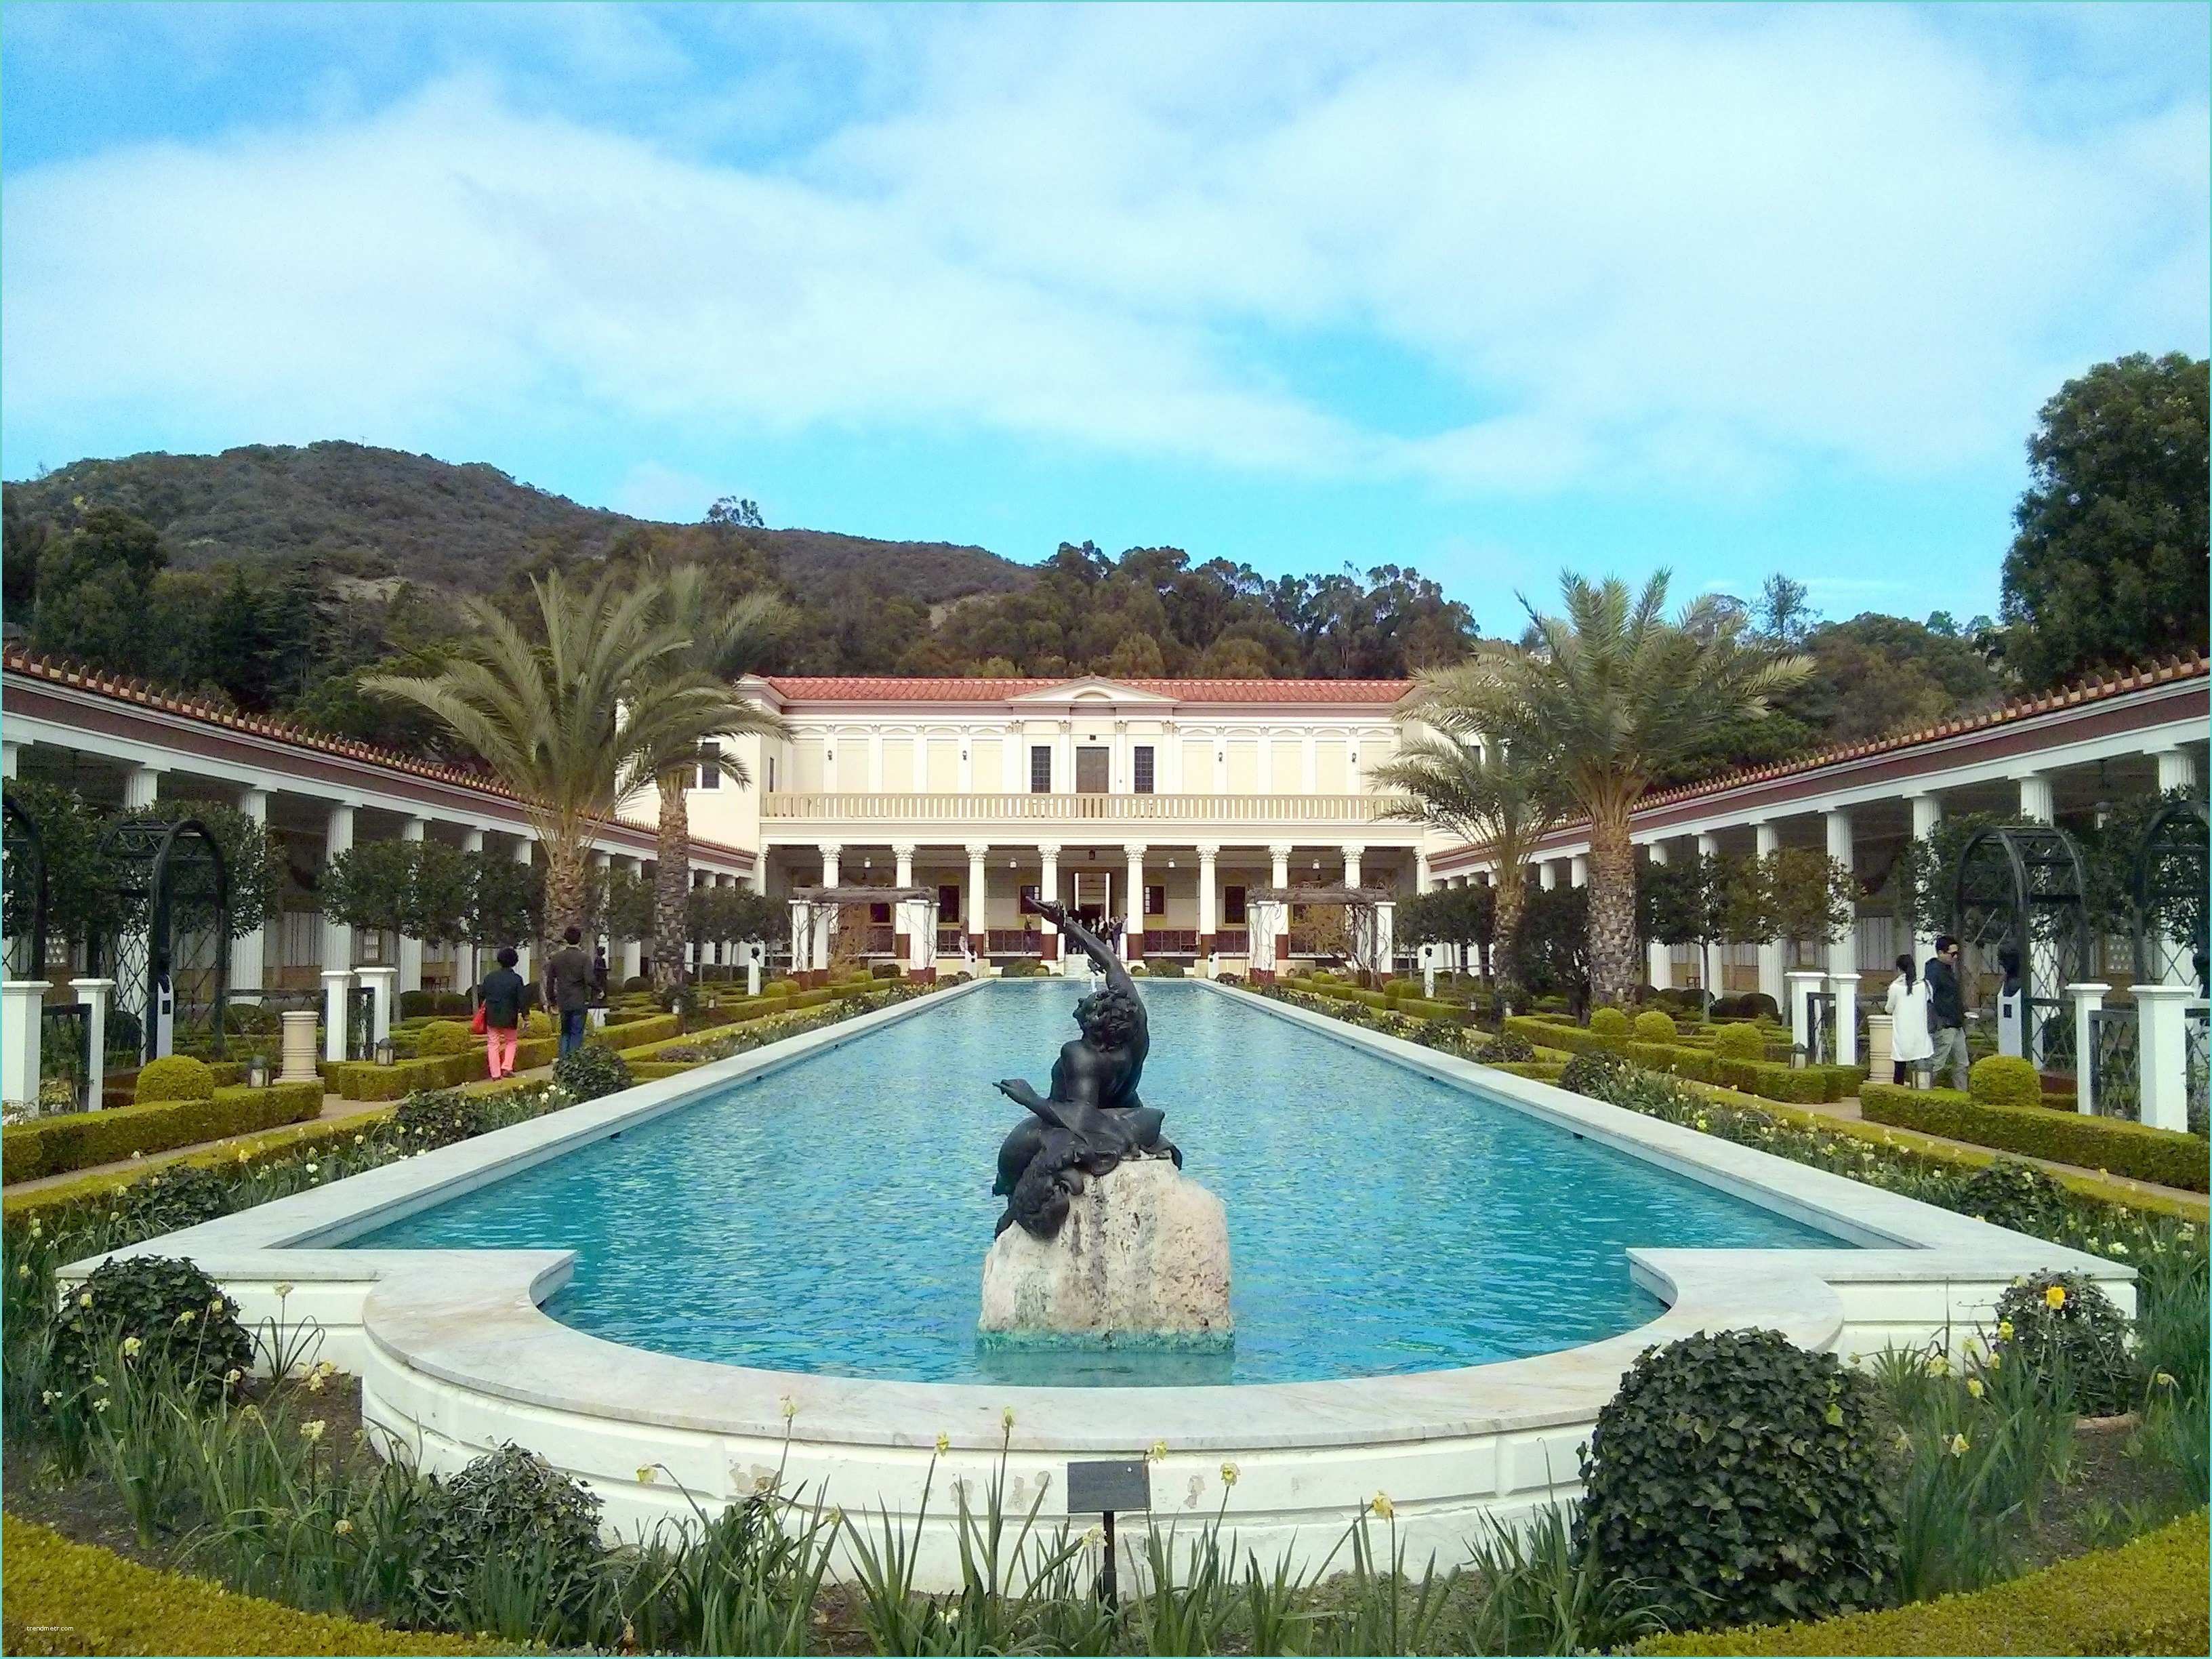 And Pictures Getty the Getty Villa Malibu Los Angeles